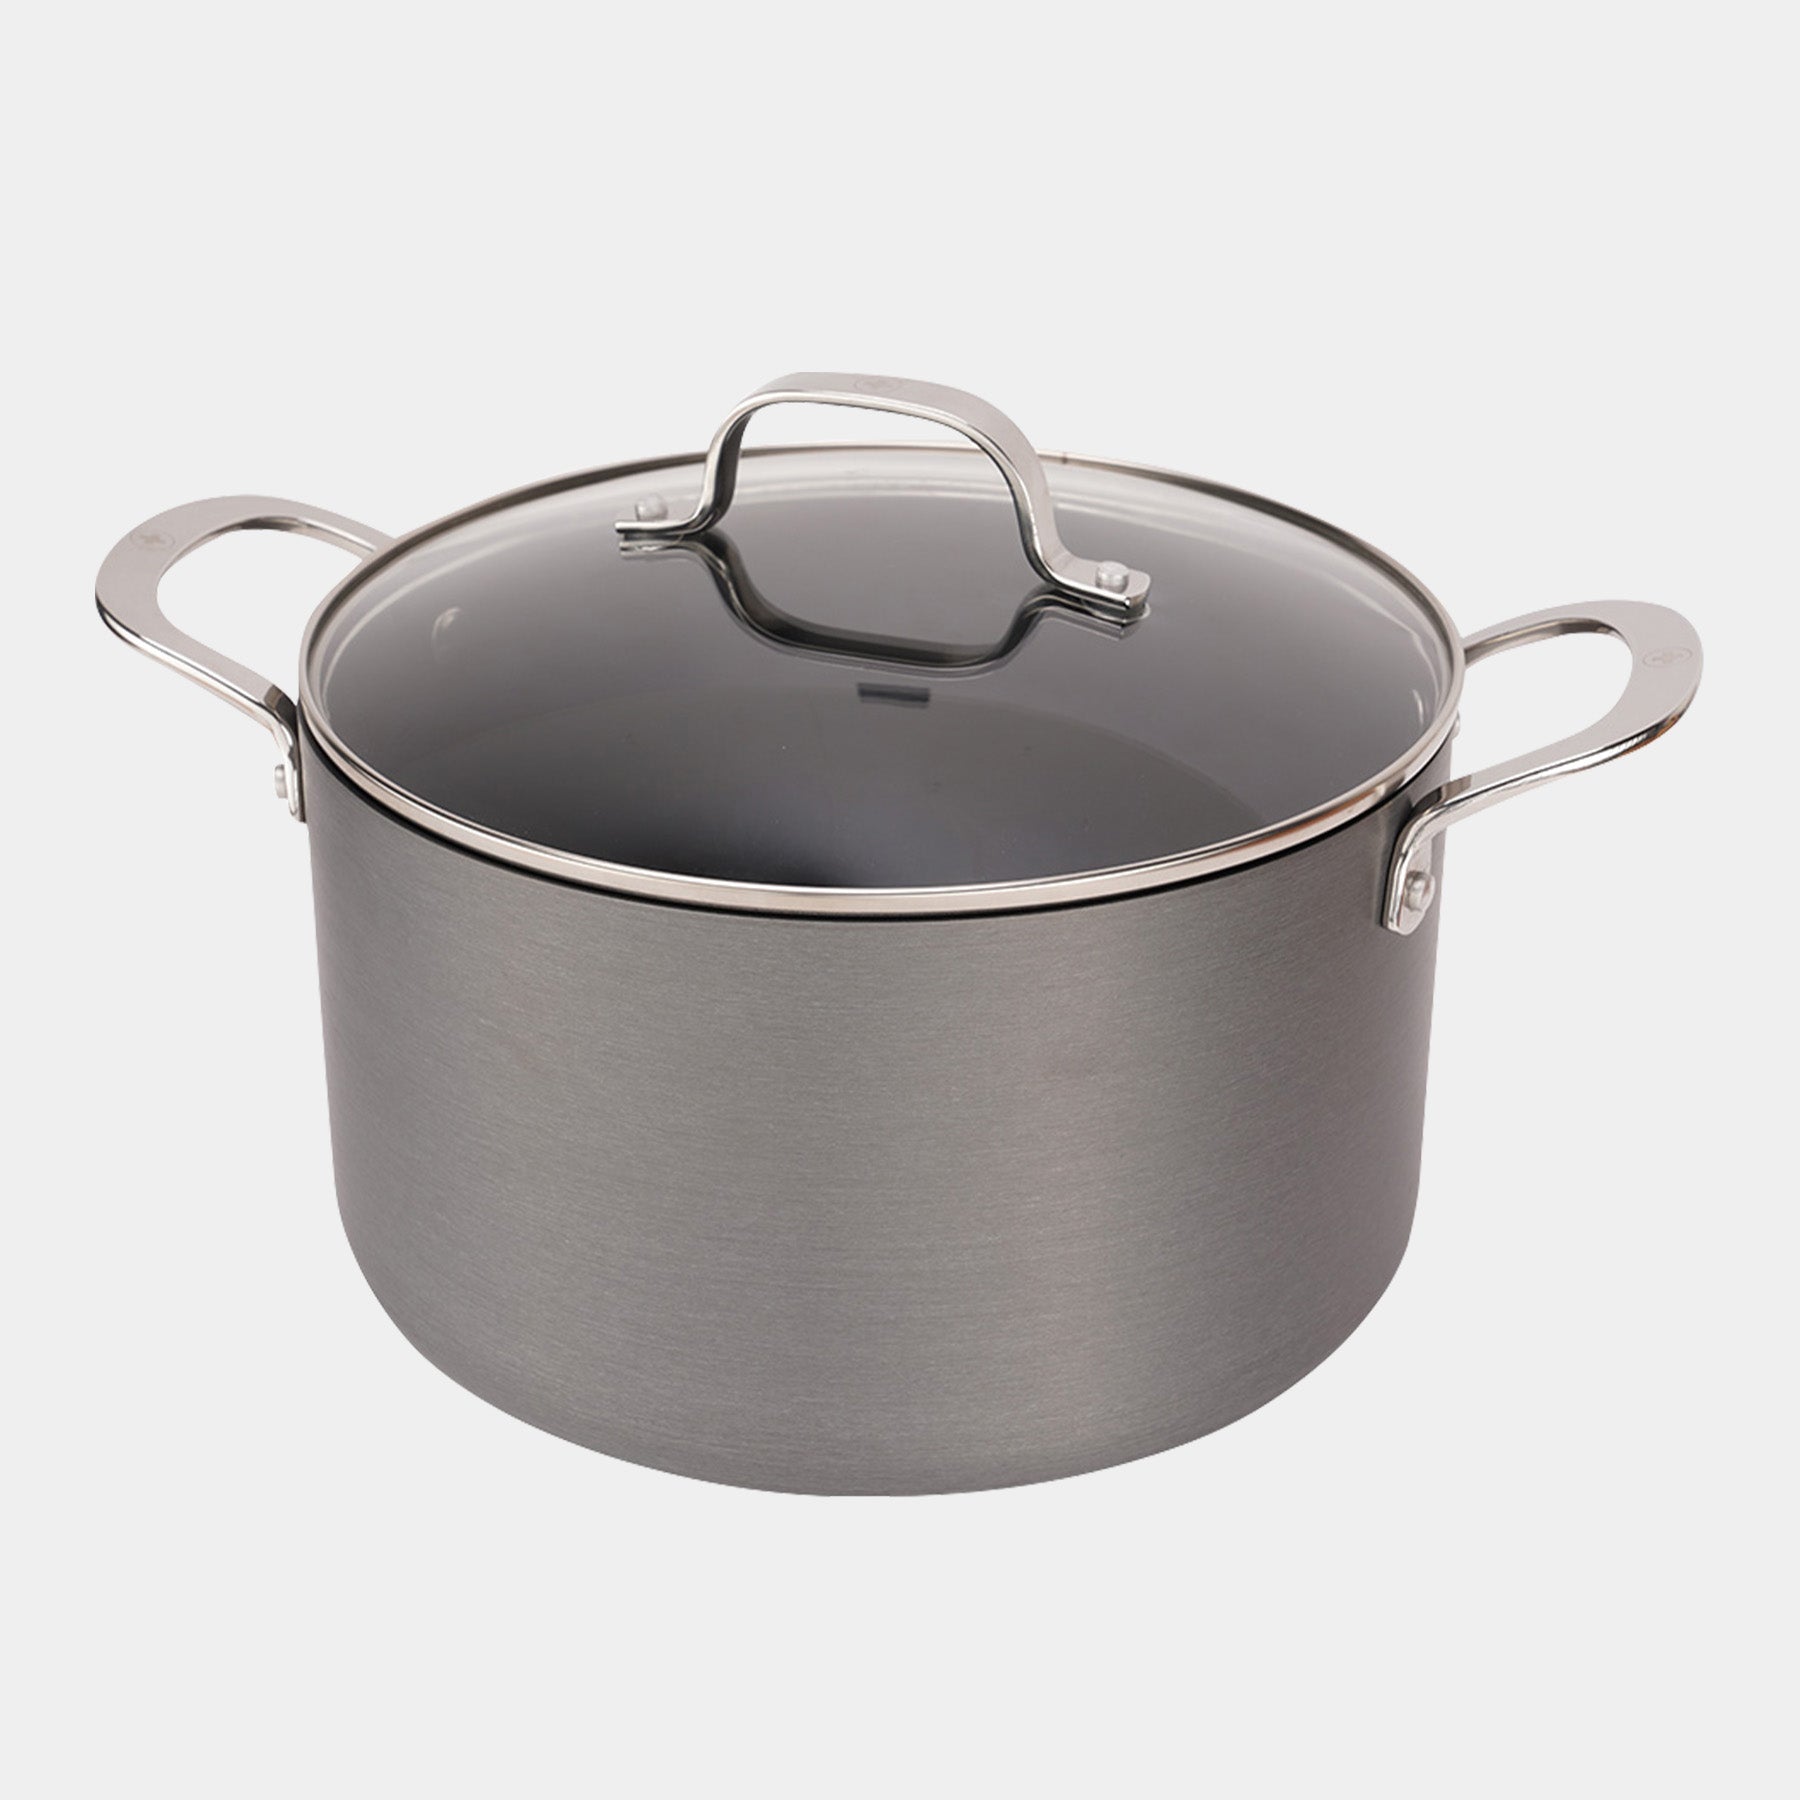 Hard Anodised 8 qt Stock Pot with Glass Lid